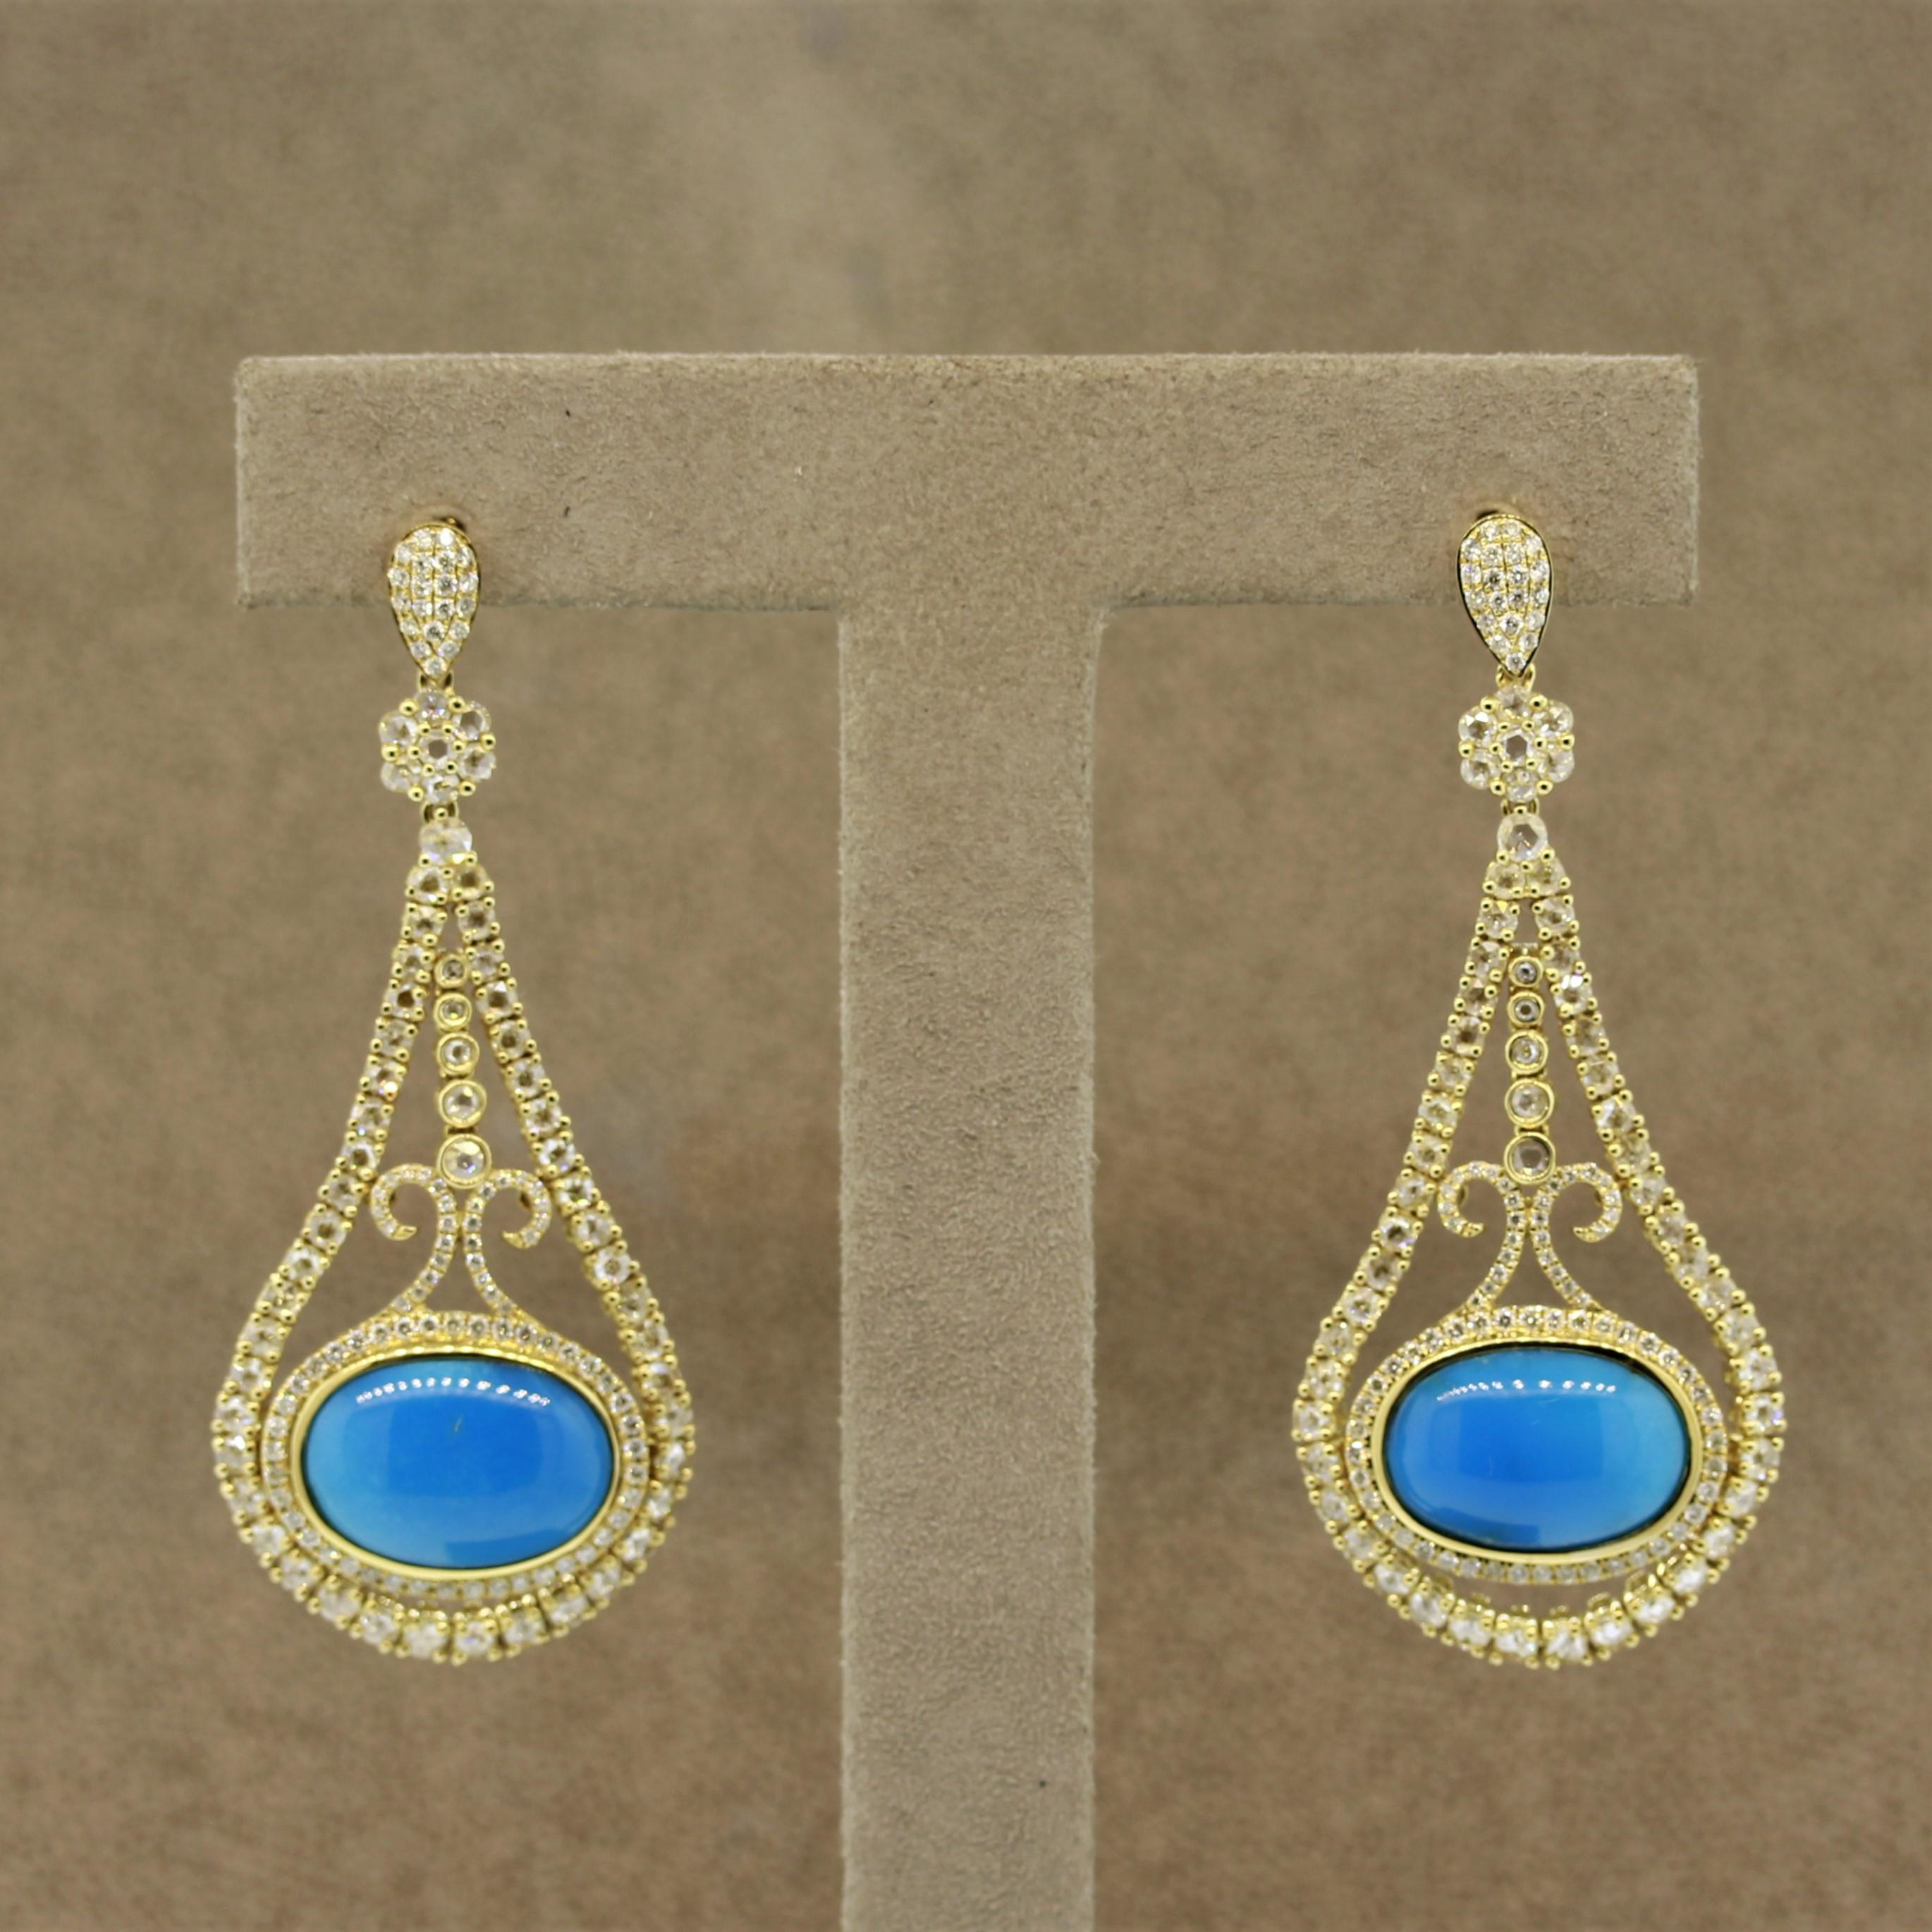 A lovely pair of diamond earrings featuring 2 pieces of turquoise with a beautiful even blue color which weigh a total of 14.40 carats. They are completed by 3.49 carats of diamonds which are both rose cuts and round brilliants. Hand fabricated in